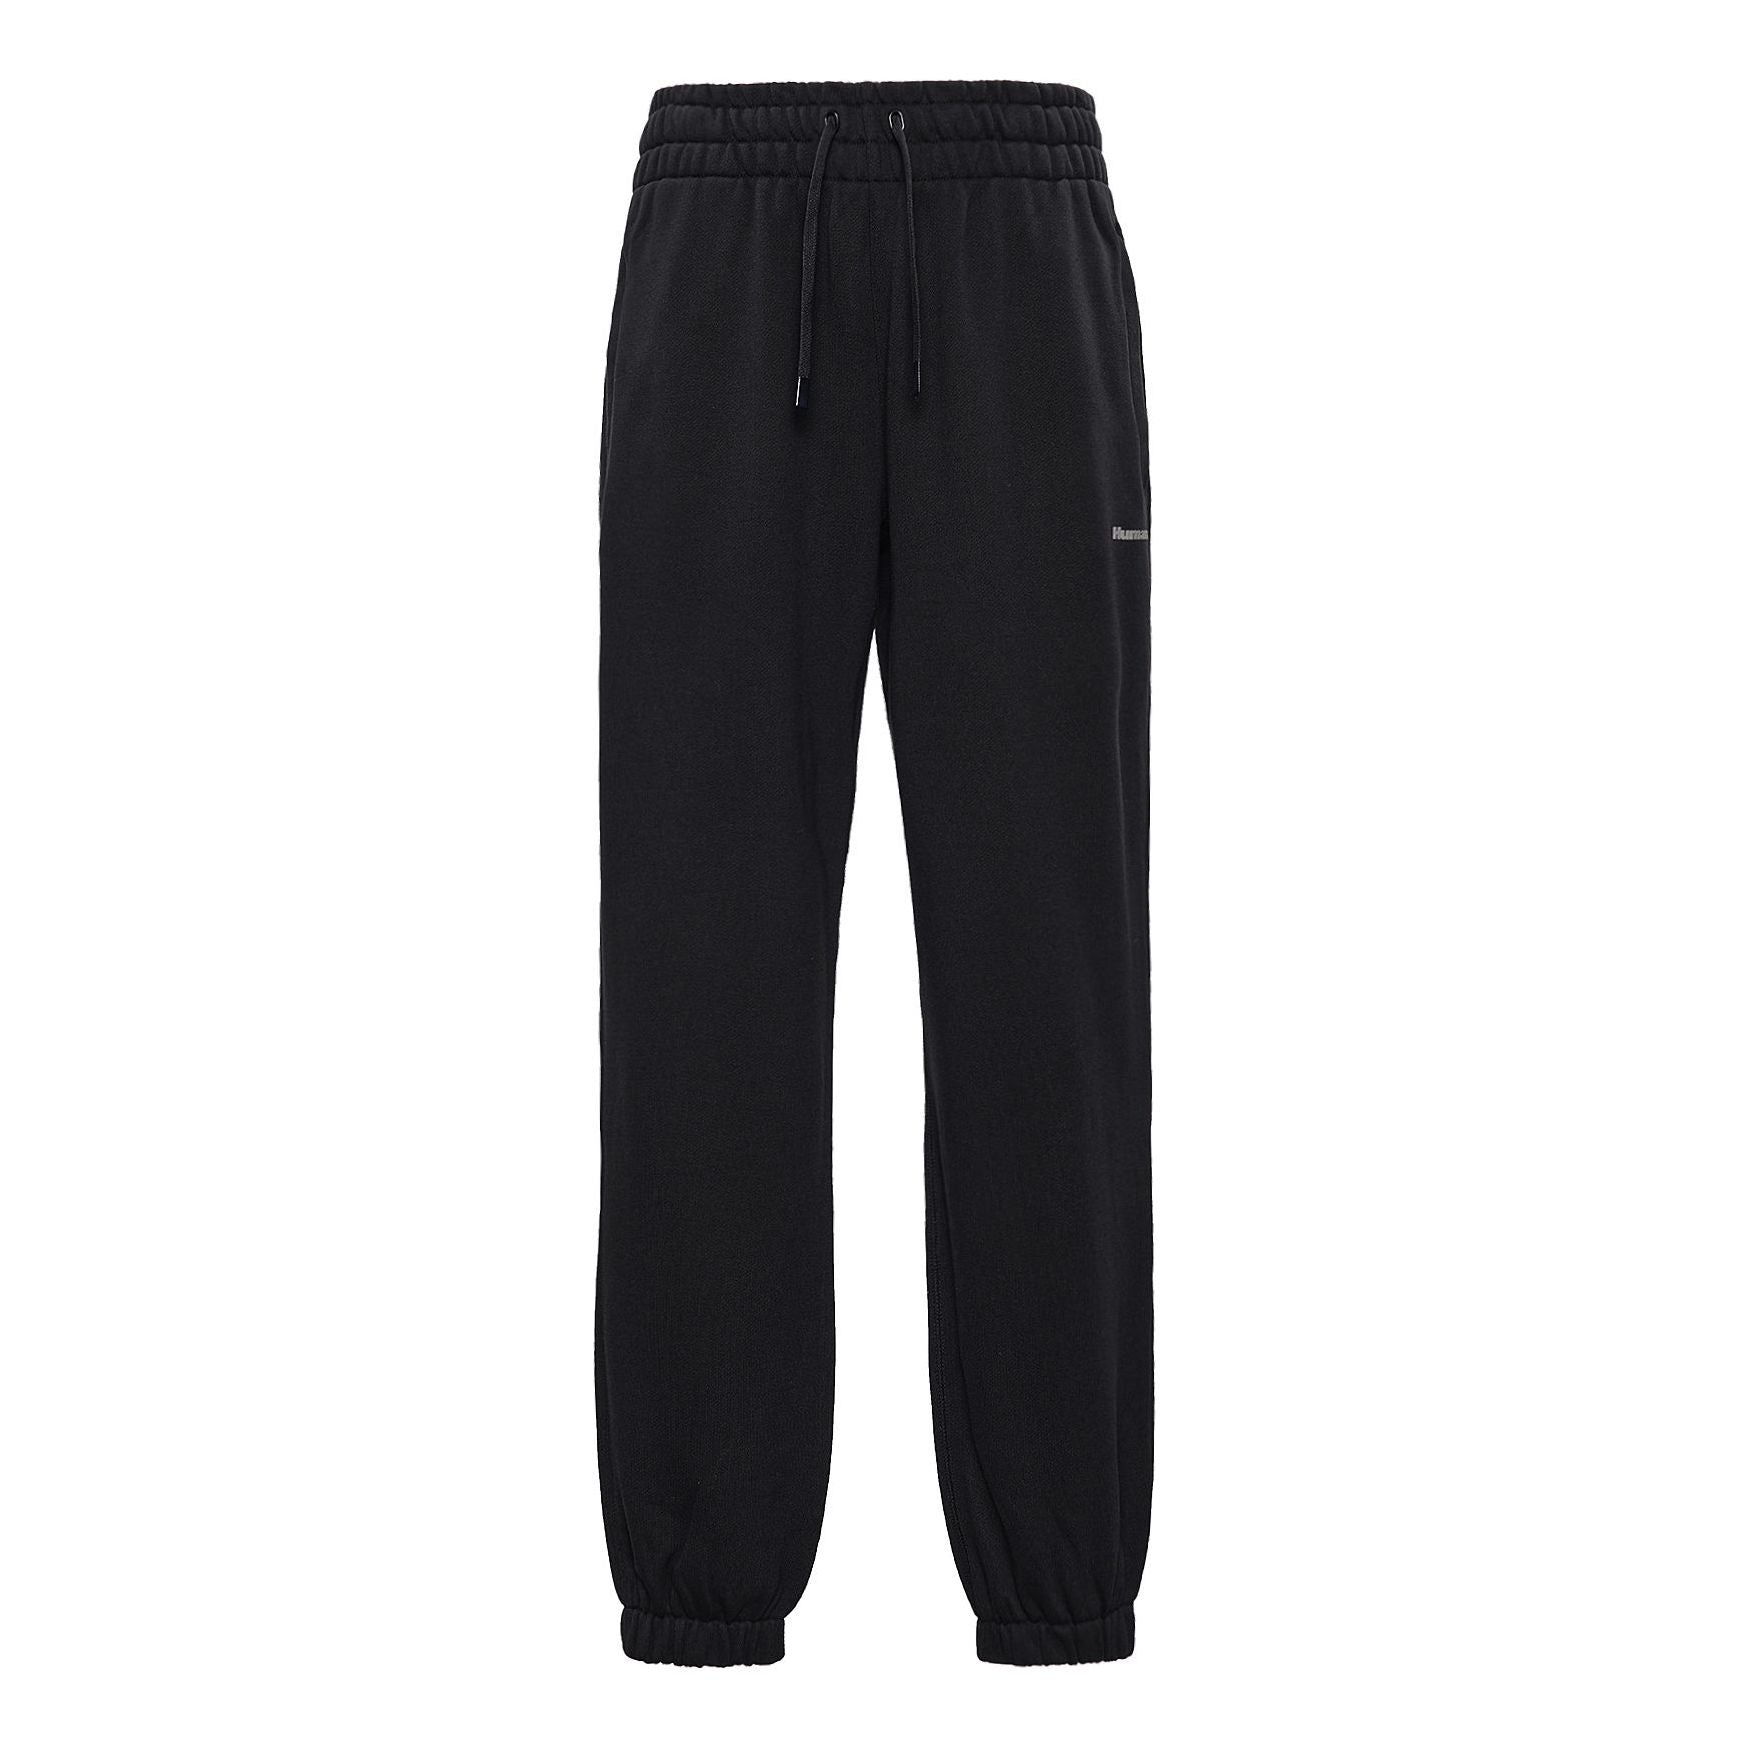 adidas originals x Pharrell Williams Crossover Solid Color Lacing Bundle Feet Sports Pants/Trousers/ - 1